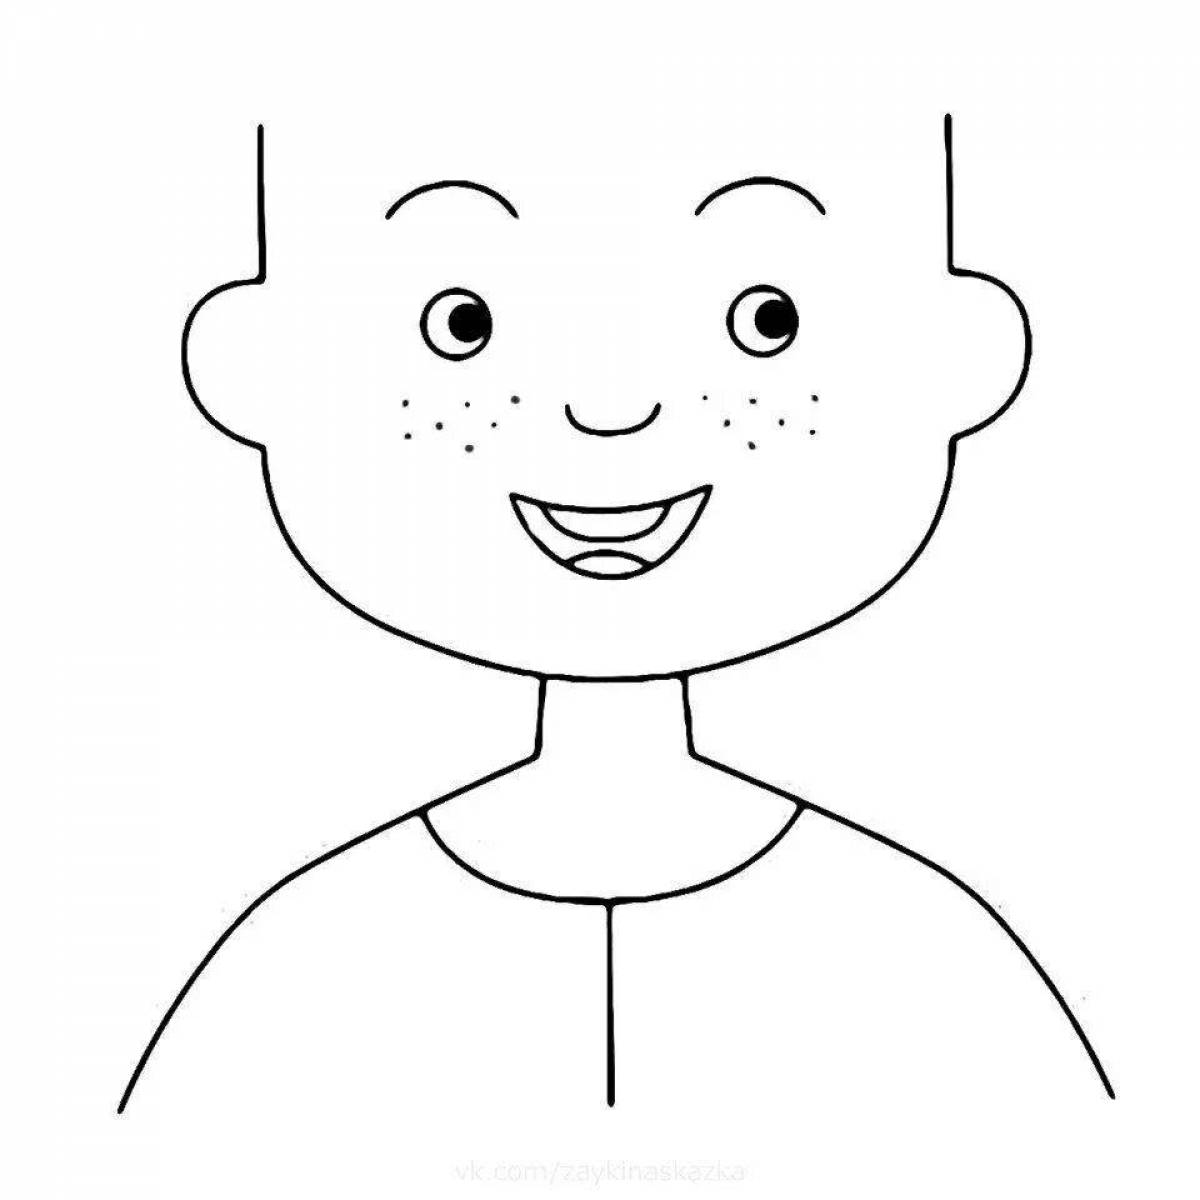 Human face for kids #21